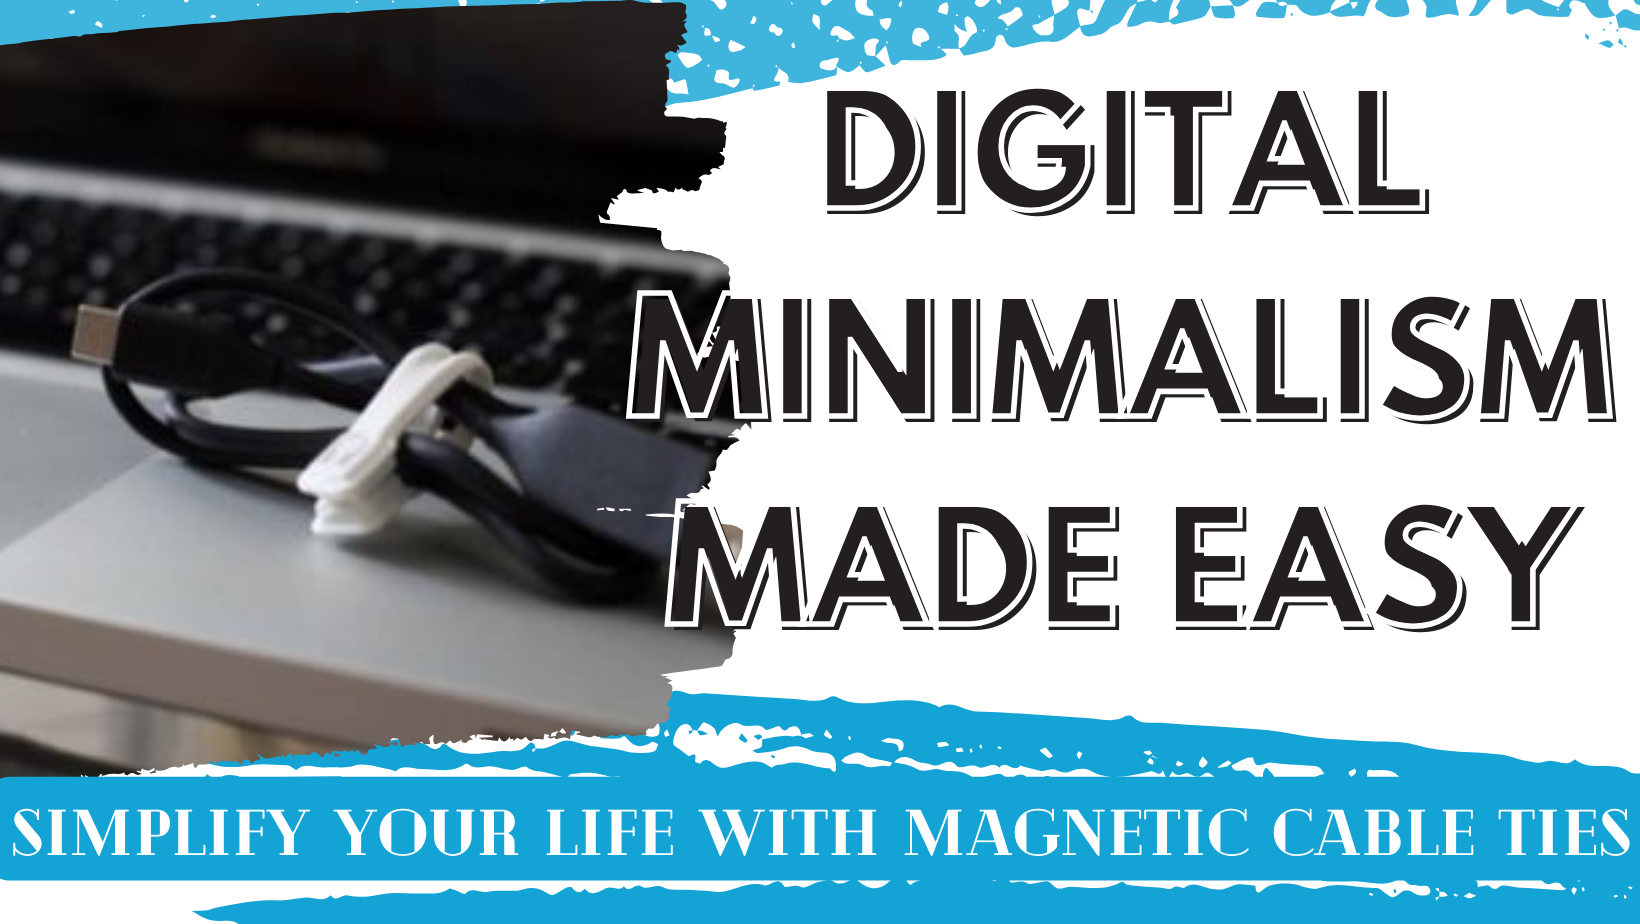 Simplify Your Life with Magnetic Cable Ties